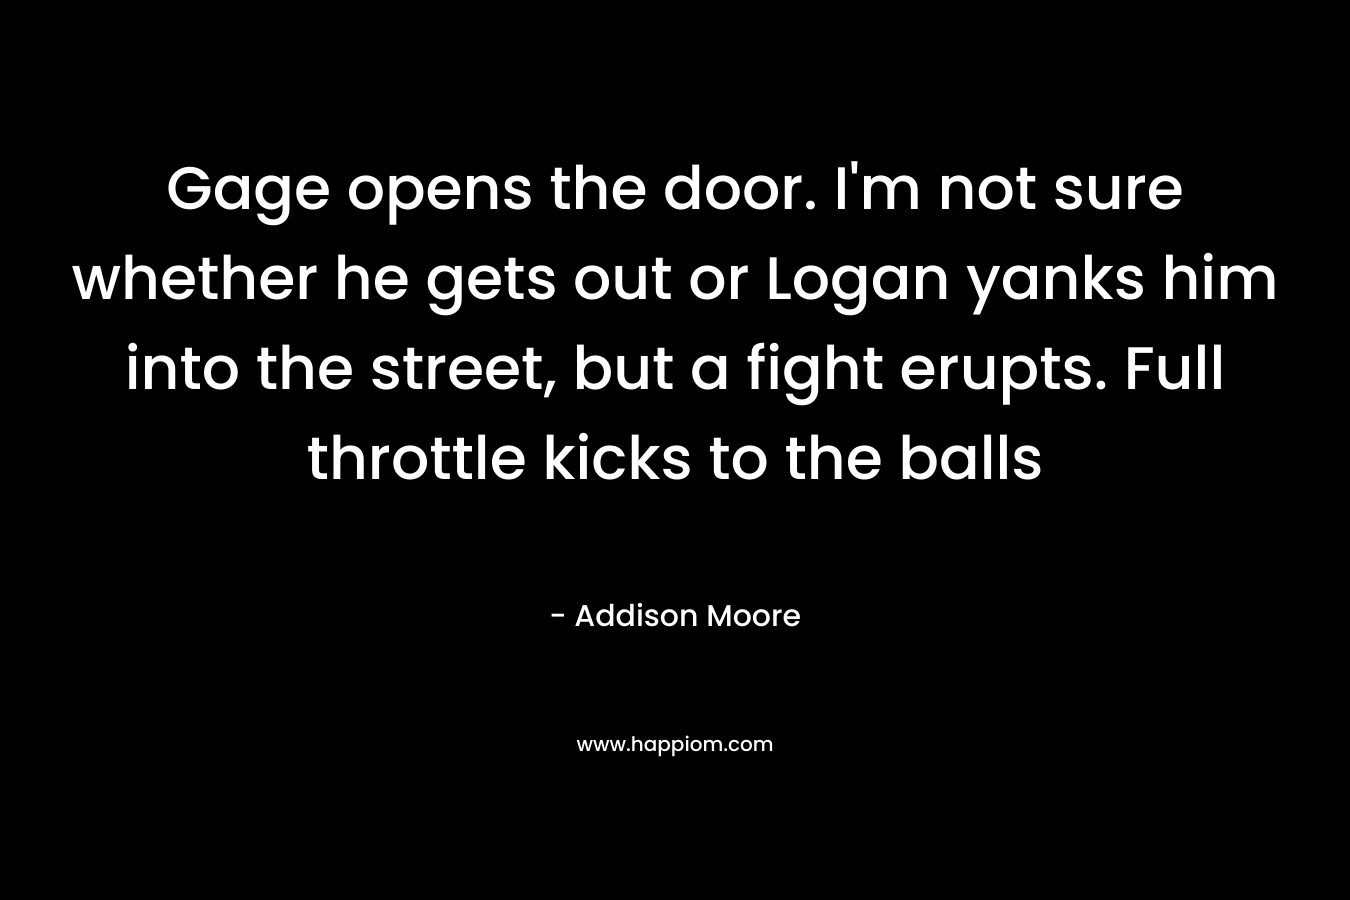 Gage opens the door. I'm not sure whether he gets out or Logan yanks him into the street, but a fight erupts. Full throttle kicks to the balls